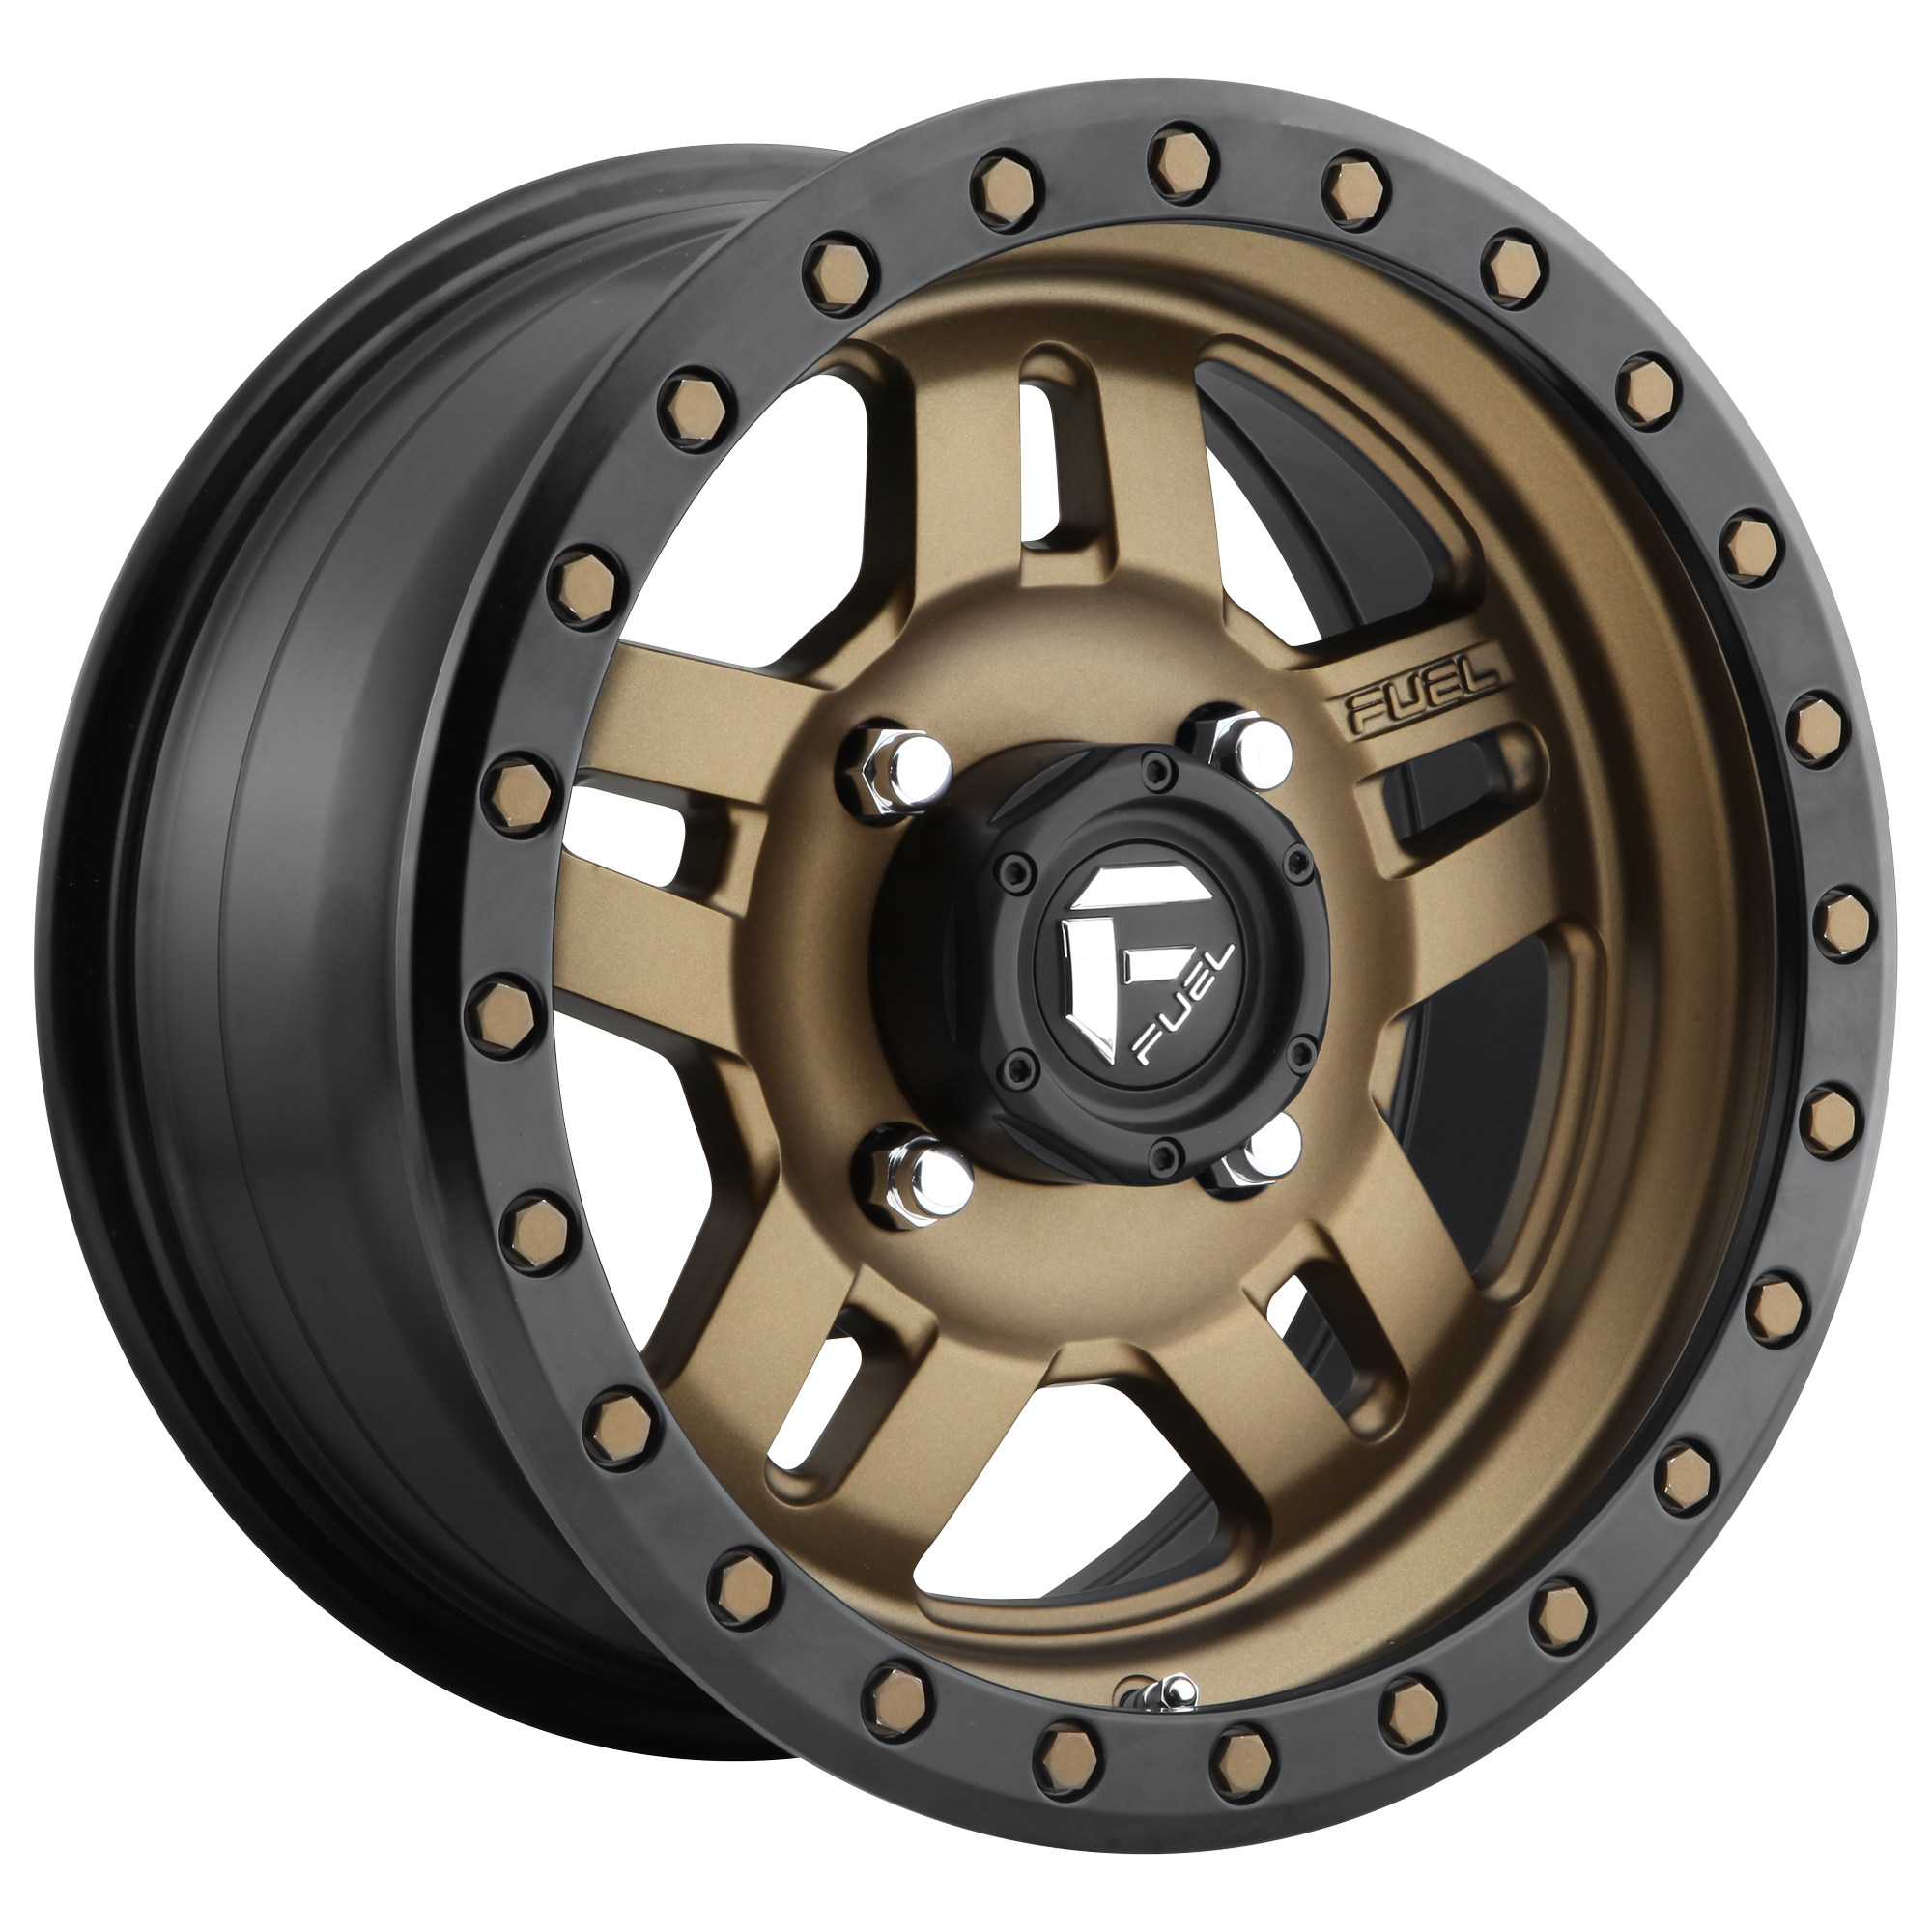 ANZA 4+3 14x7 4x156.00 MATTE BRONZE BLACK BEAD RING (13 mm) - Tires and Engine Performance